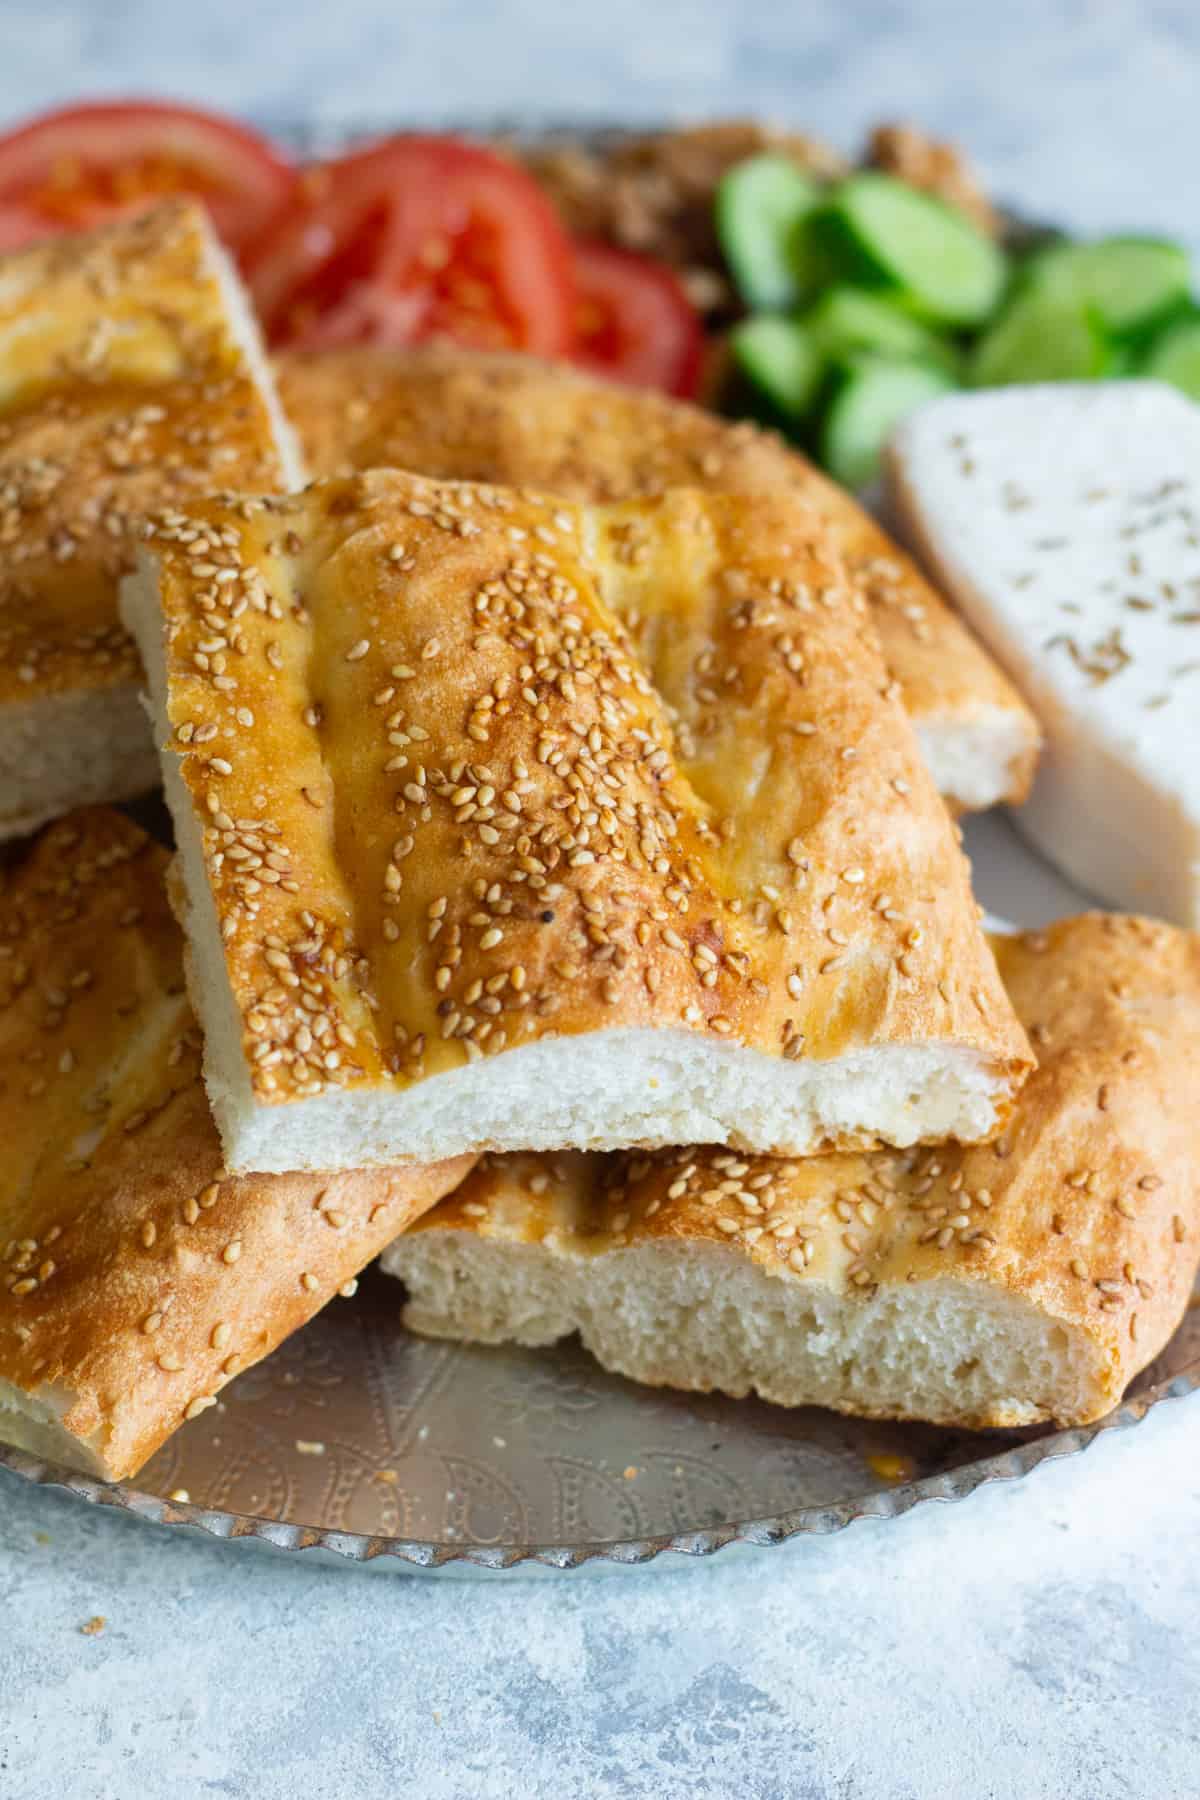 nan barbari is a classic Persian bread that you can make at home.